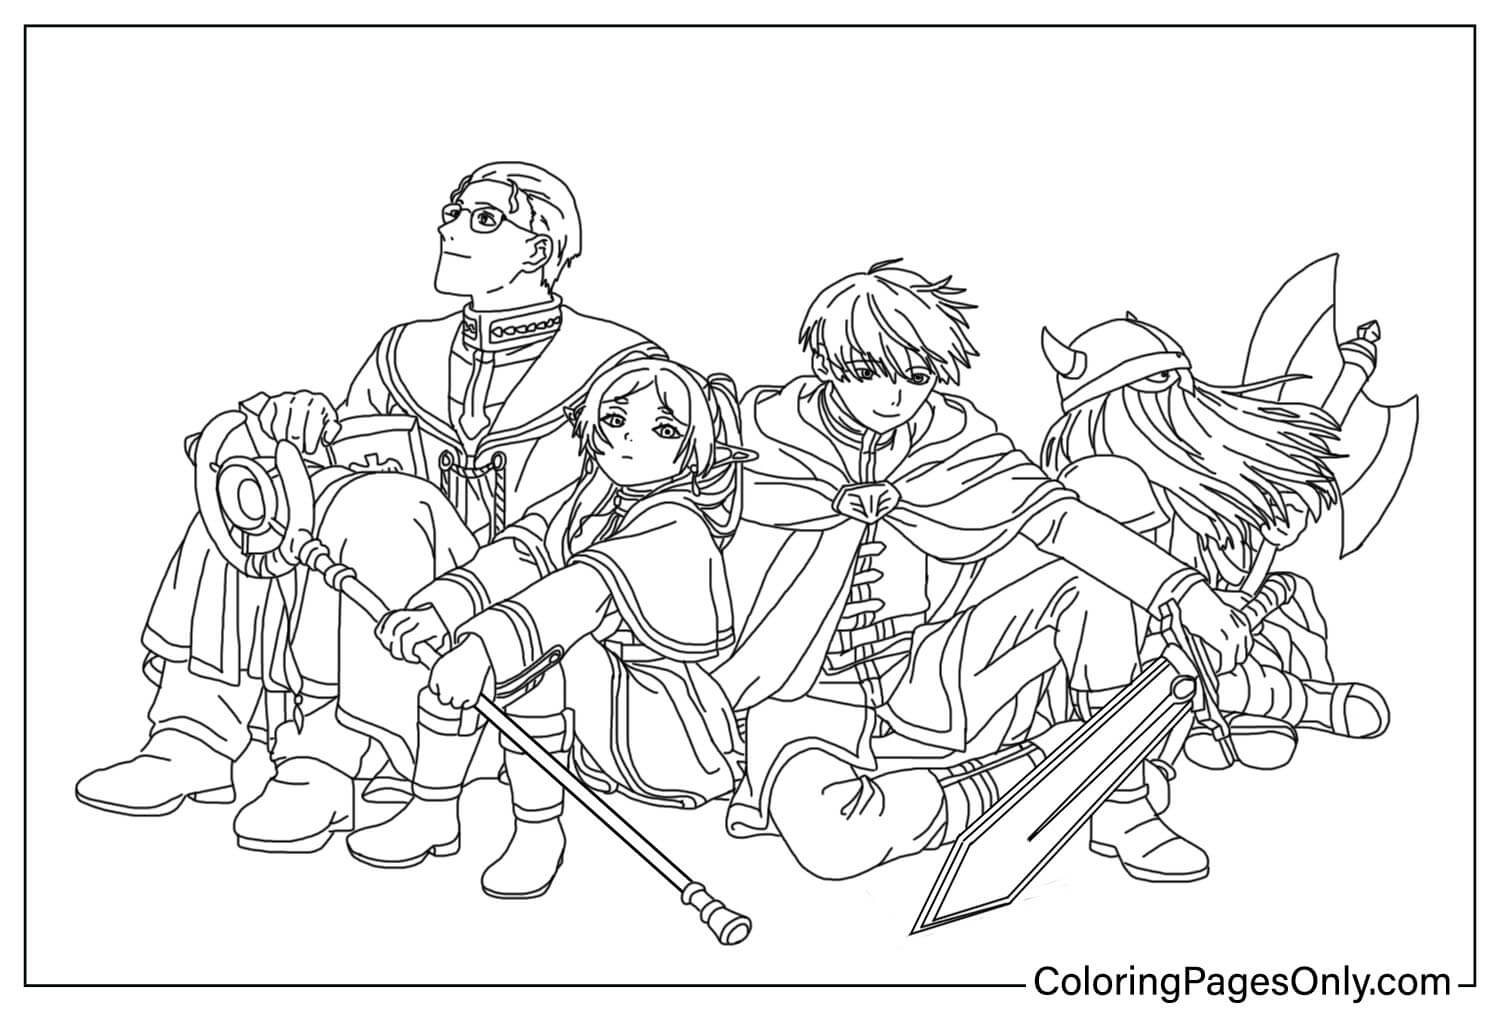 Frieren: Beyond Journey’s End Coloring Page from Frieren: Beyond Journey’s End